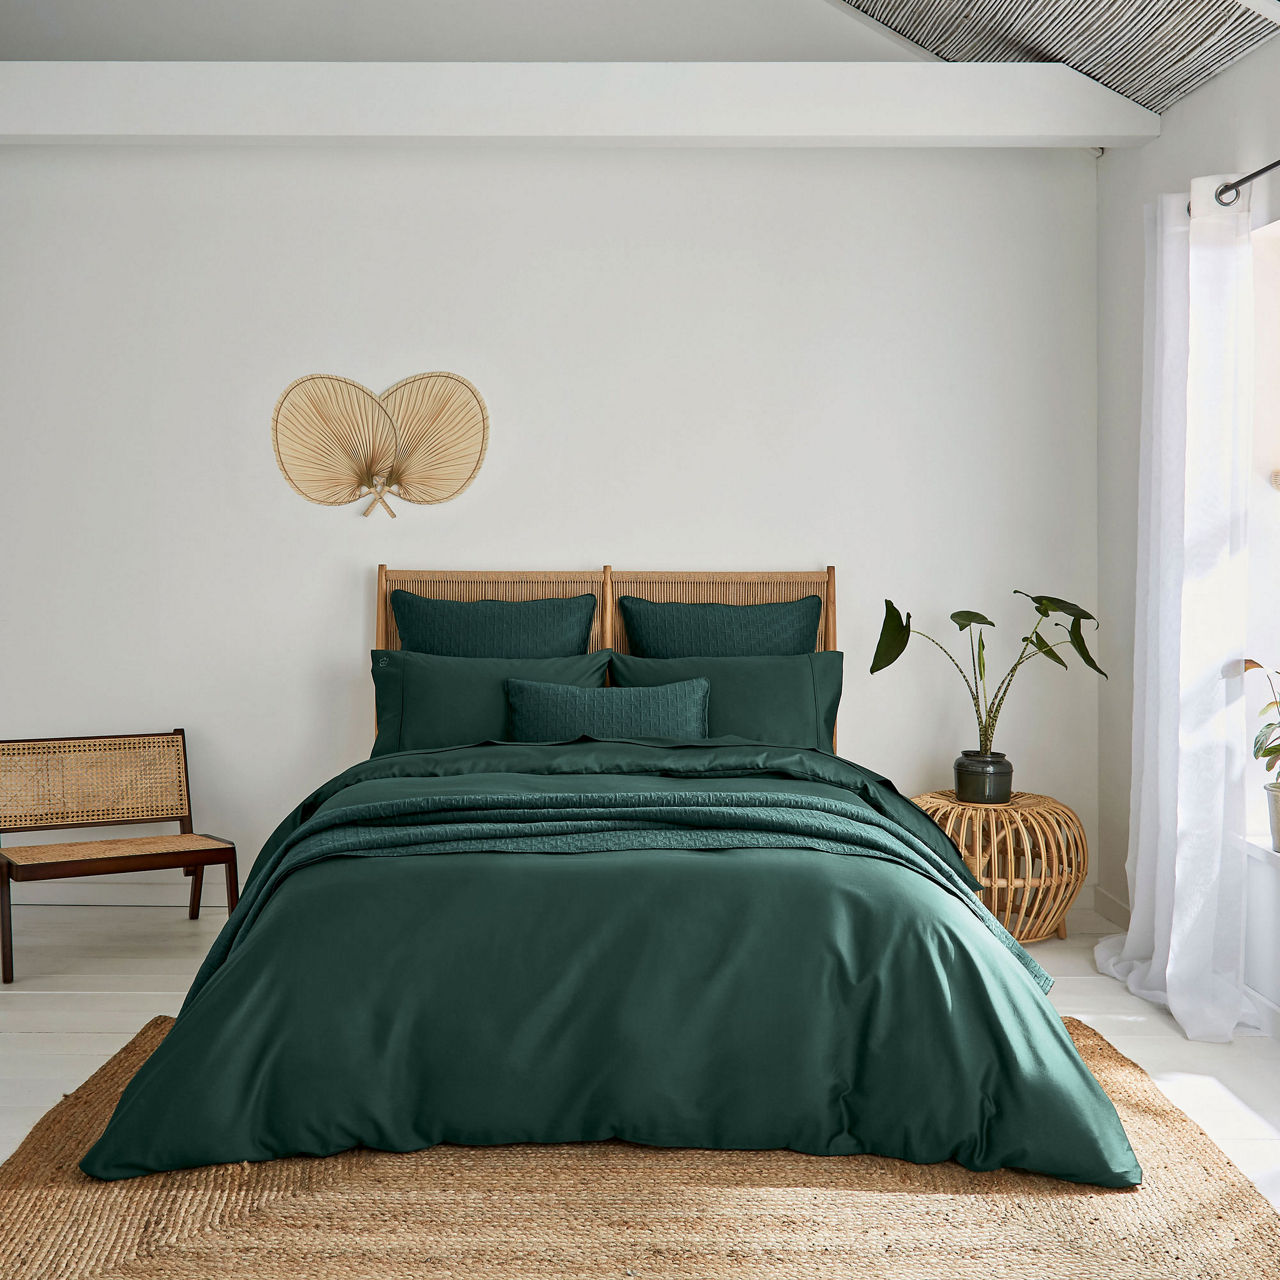 Plain Dye Cotton Bedding by Ted Baker in Forest Green buy online from the  rug seller uk